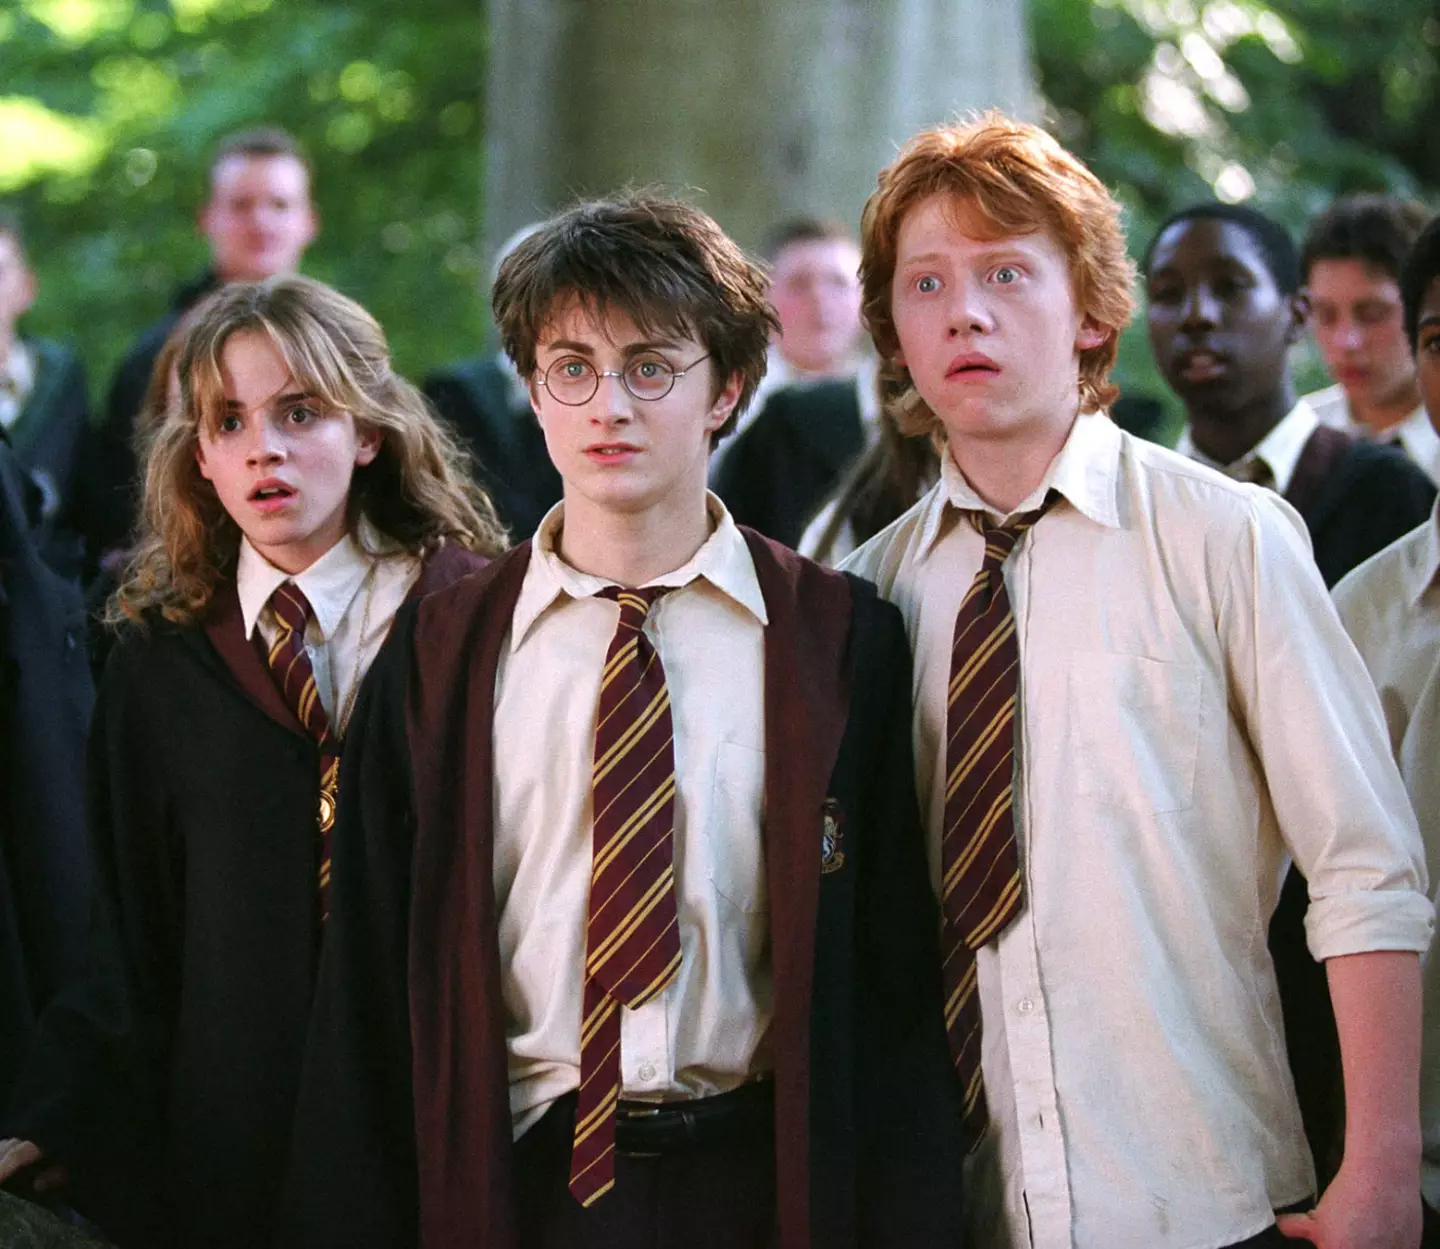 A TikTok has left Potterheads 'screaming and crying' over alternative fan ending.